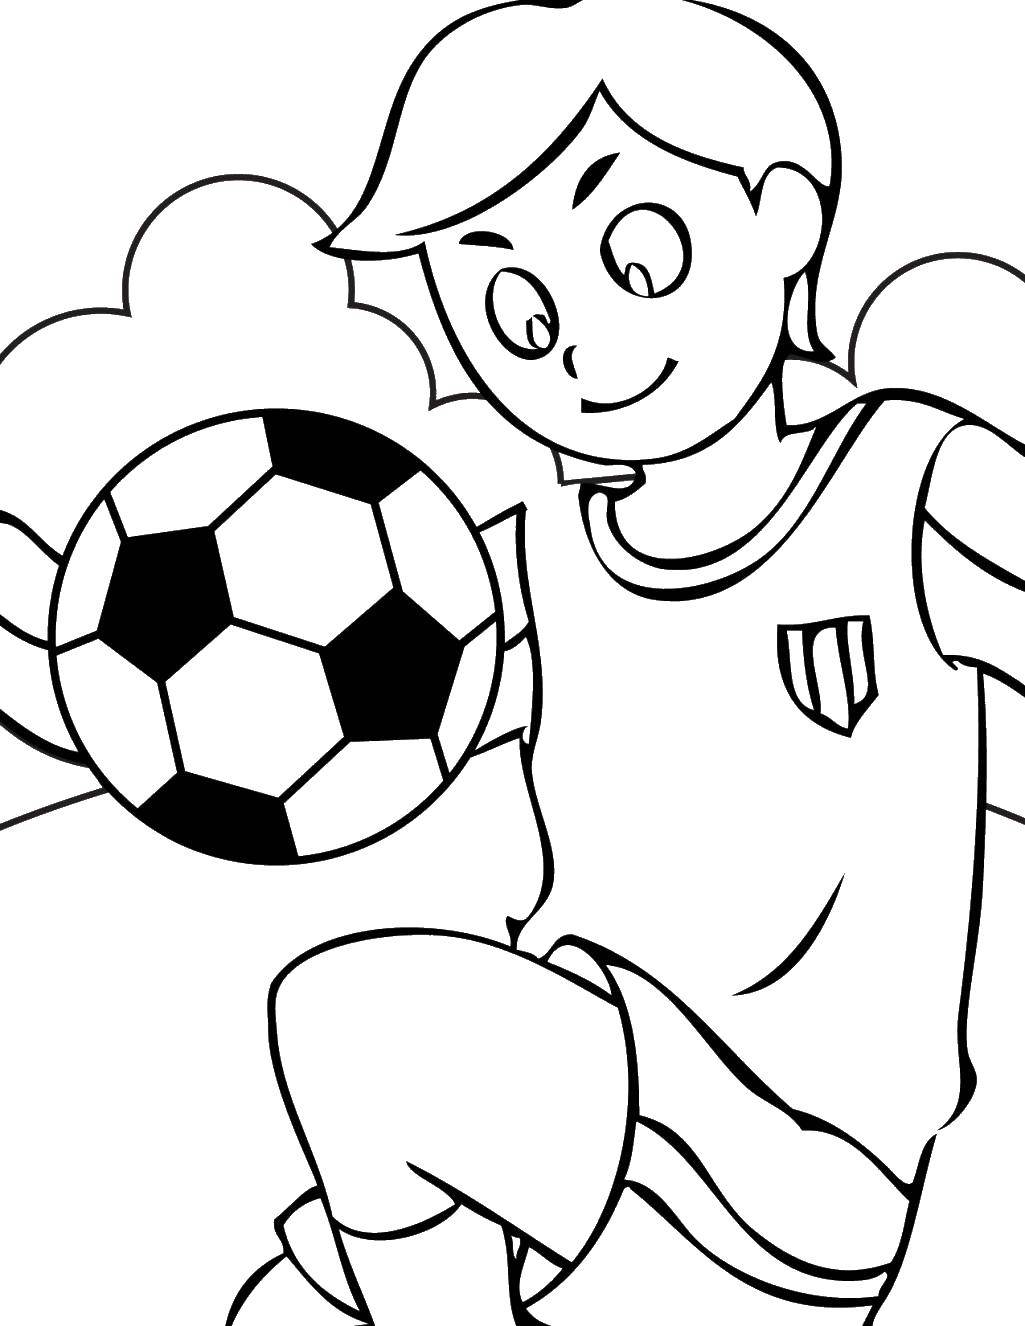 Coloring Player. Category Sports. Tags:  sports, soccer, players, game.